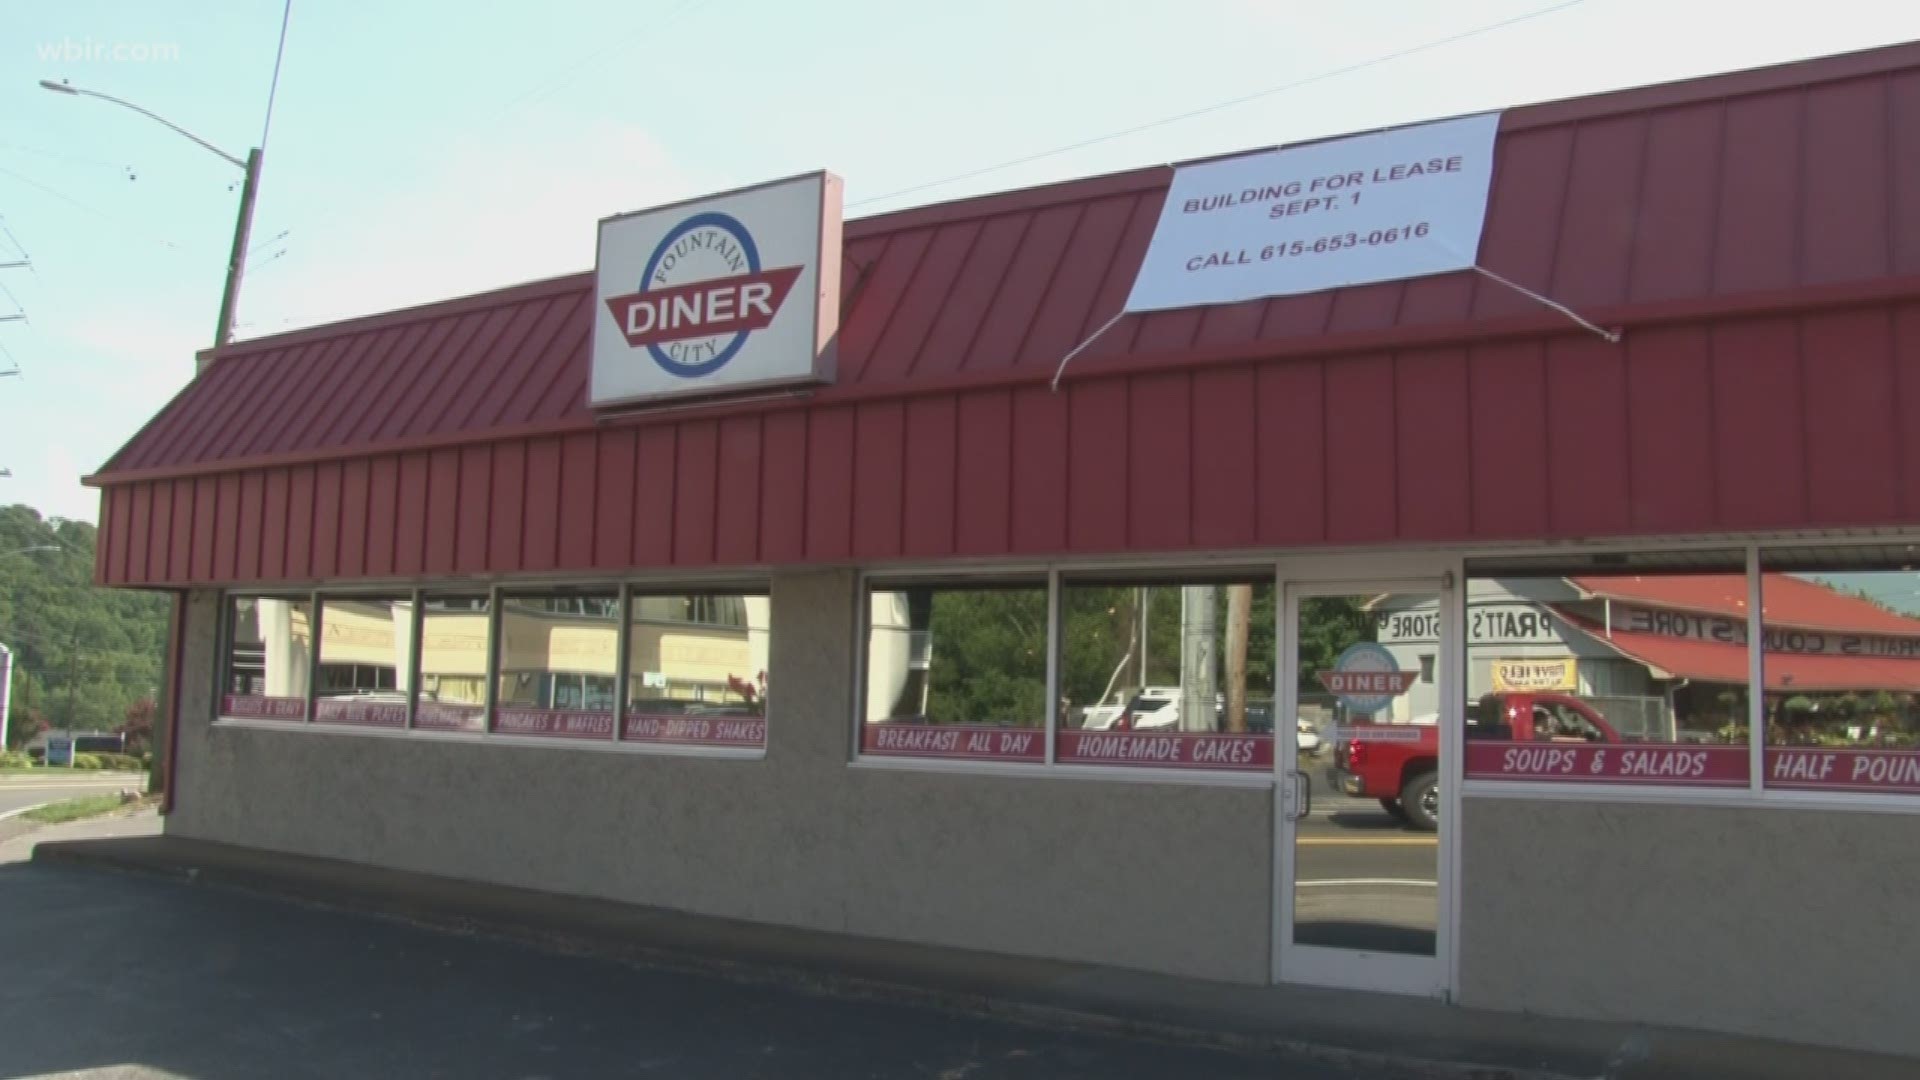 The diner's owners said they can't afford a big rent increase and are ready to move on to their next chapter.